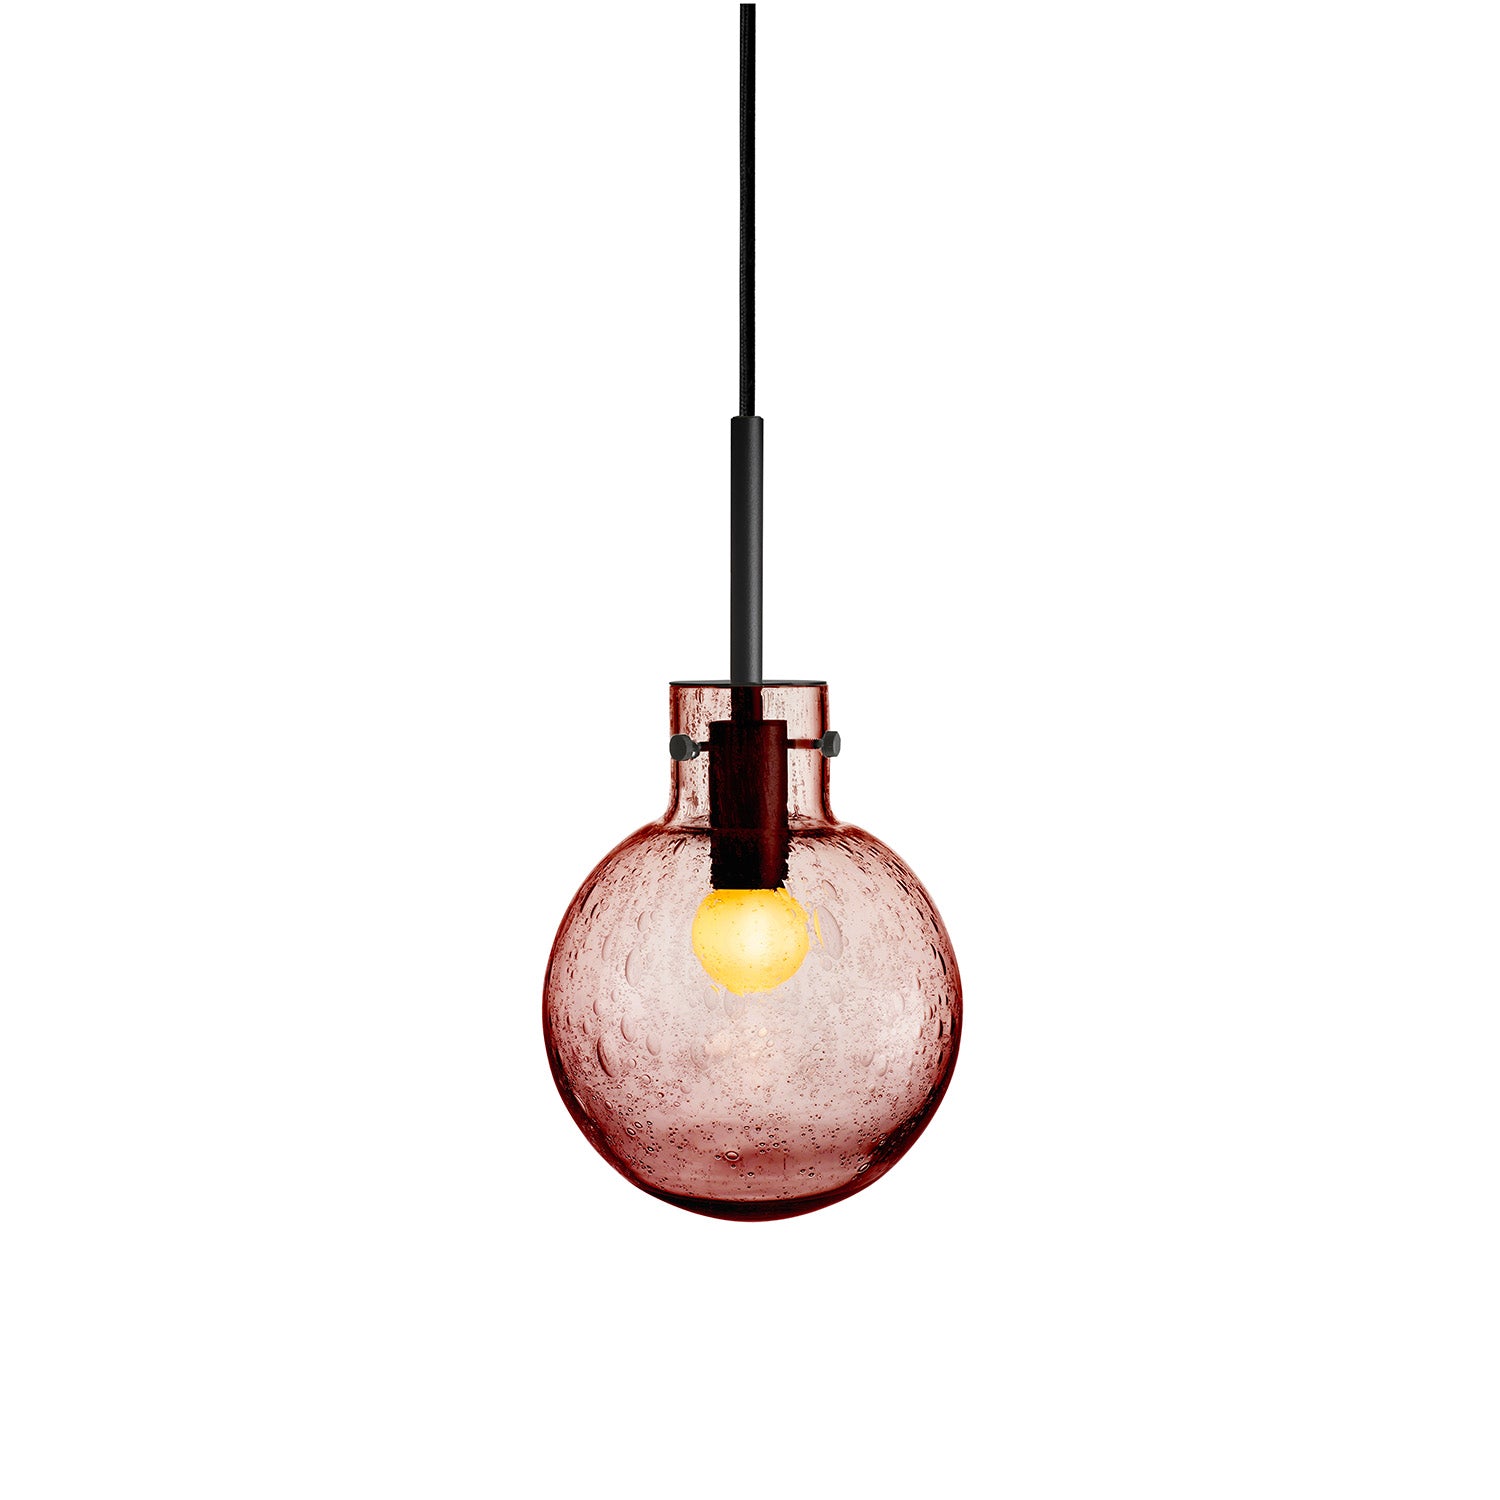 SODA - Handcrafted blown glass pendant lamp